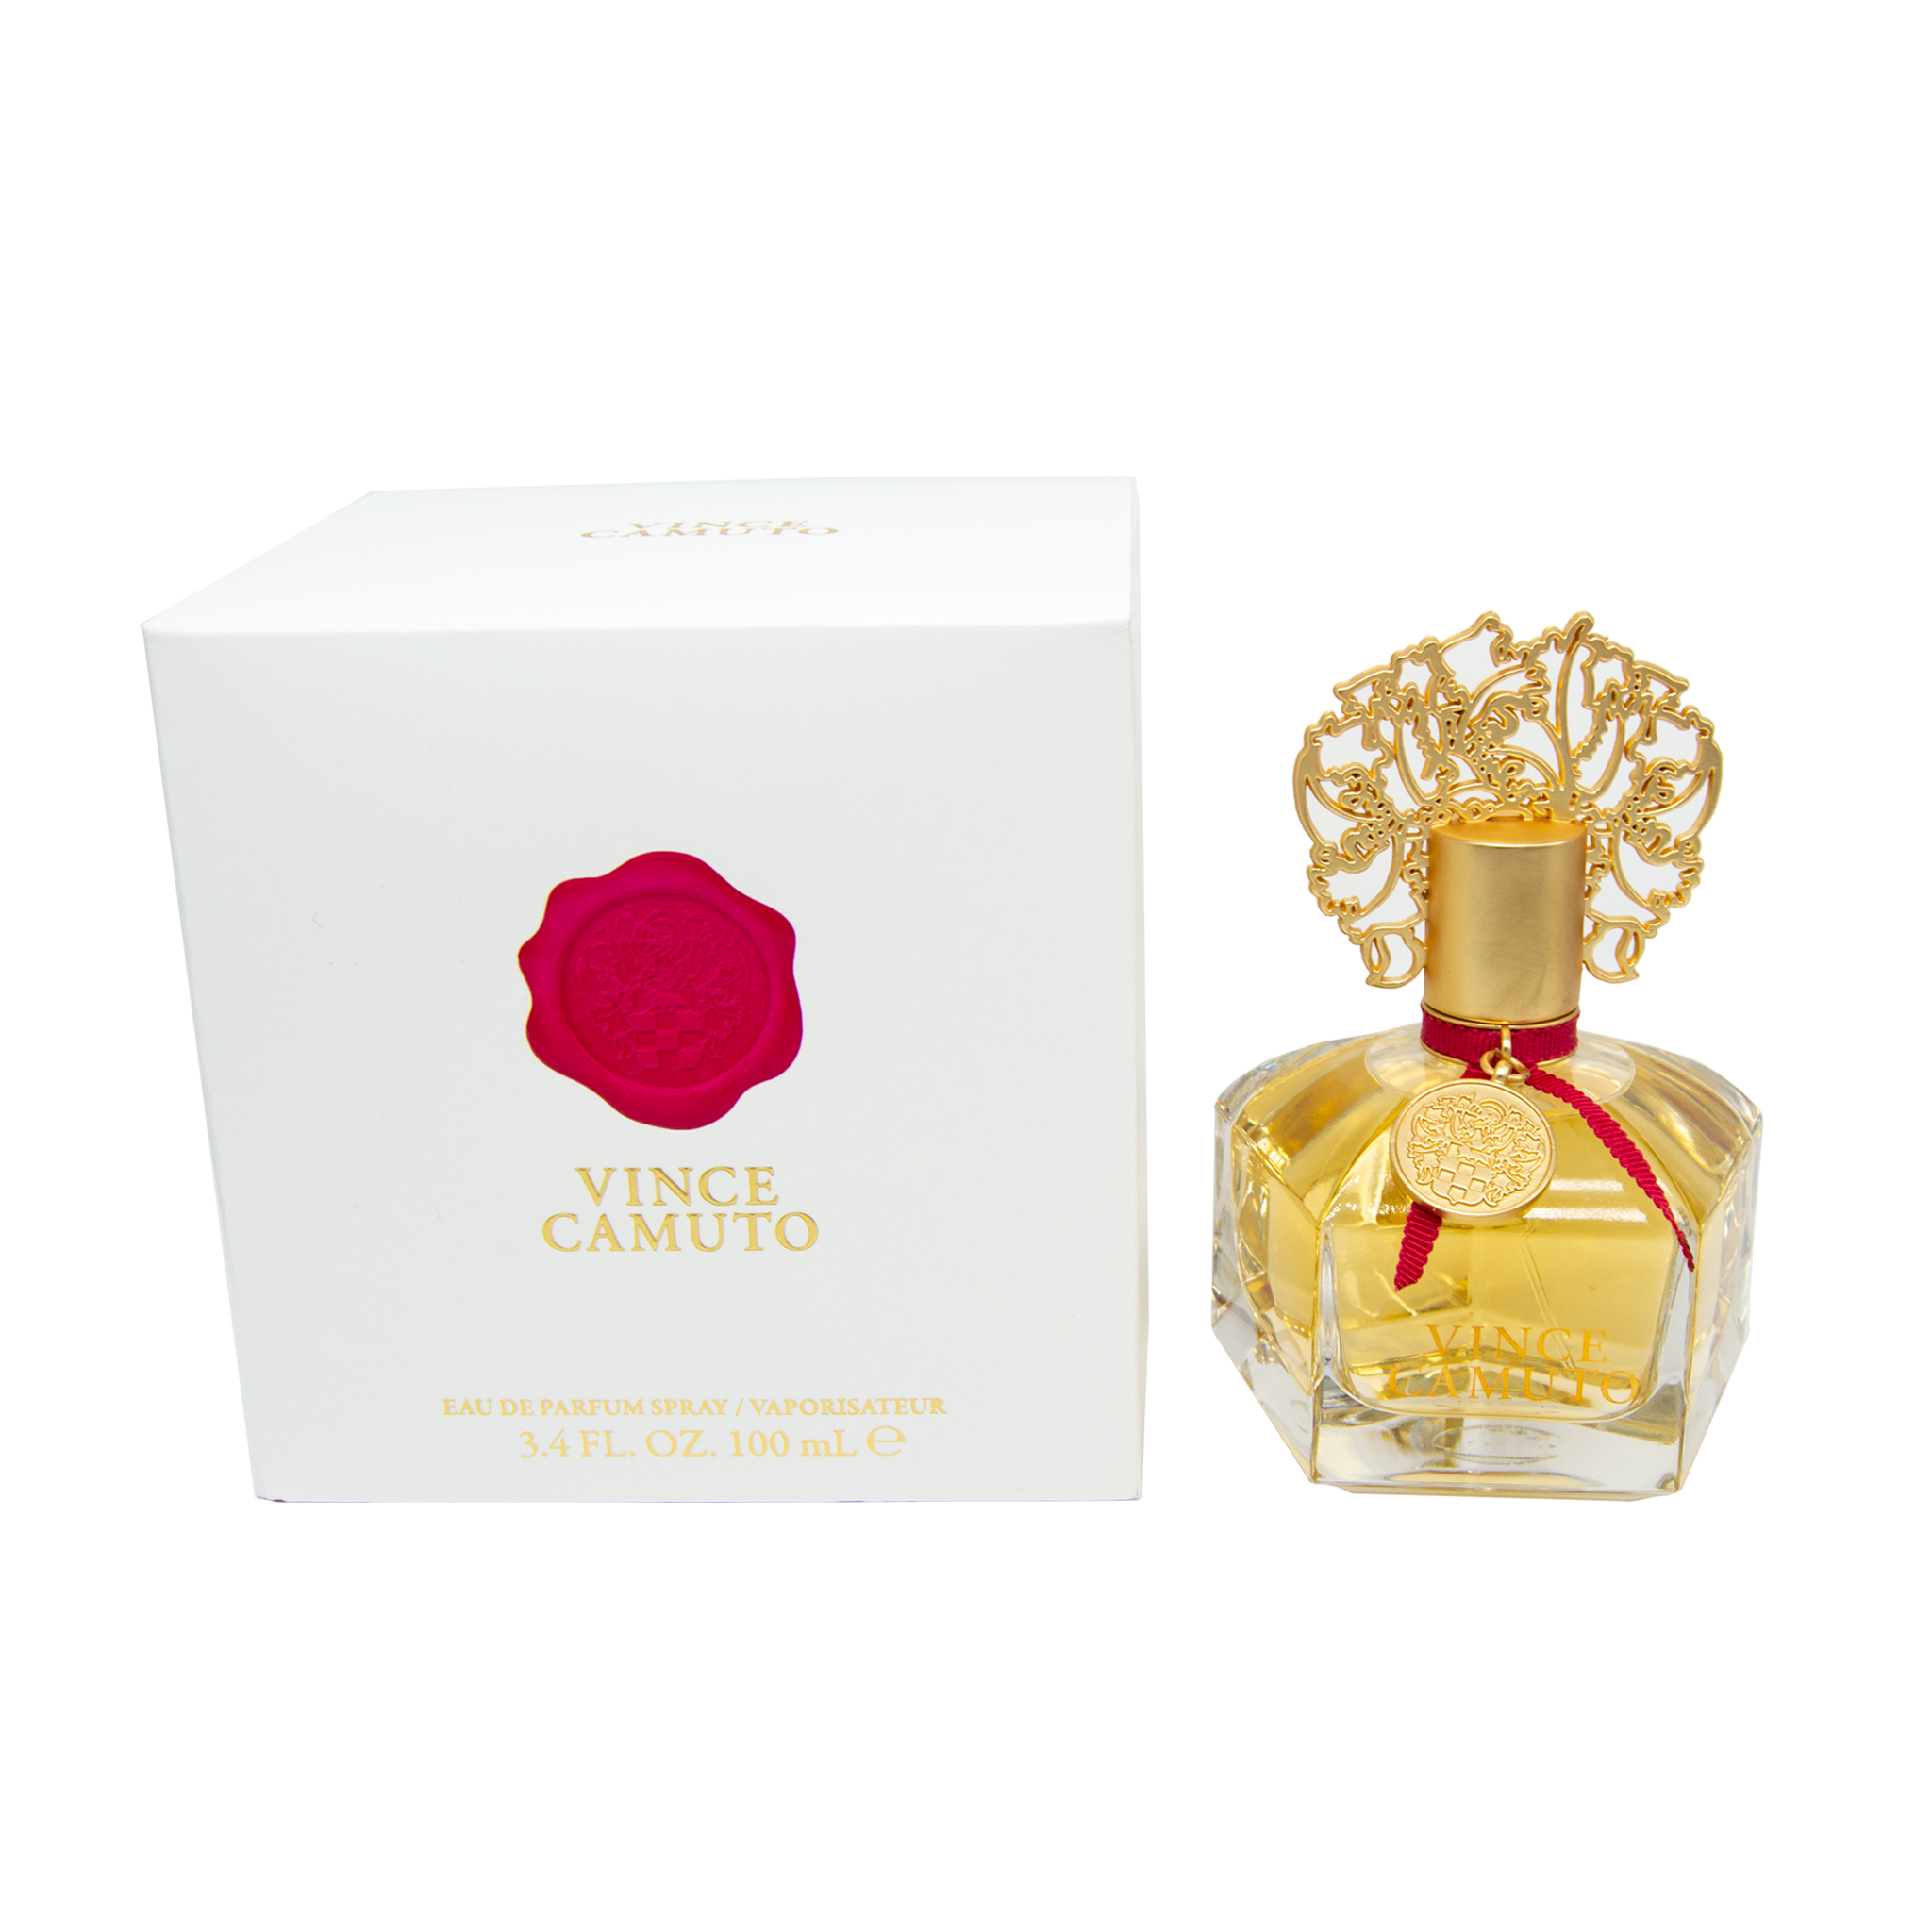 Vince Camuto Ciao by Vince Camuto 3.4 oz EDP Perfume for Women No